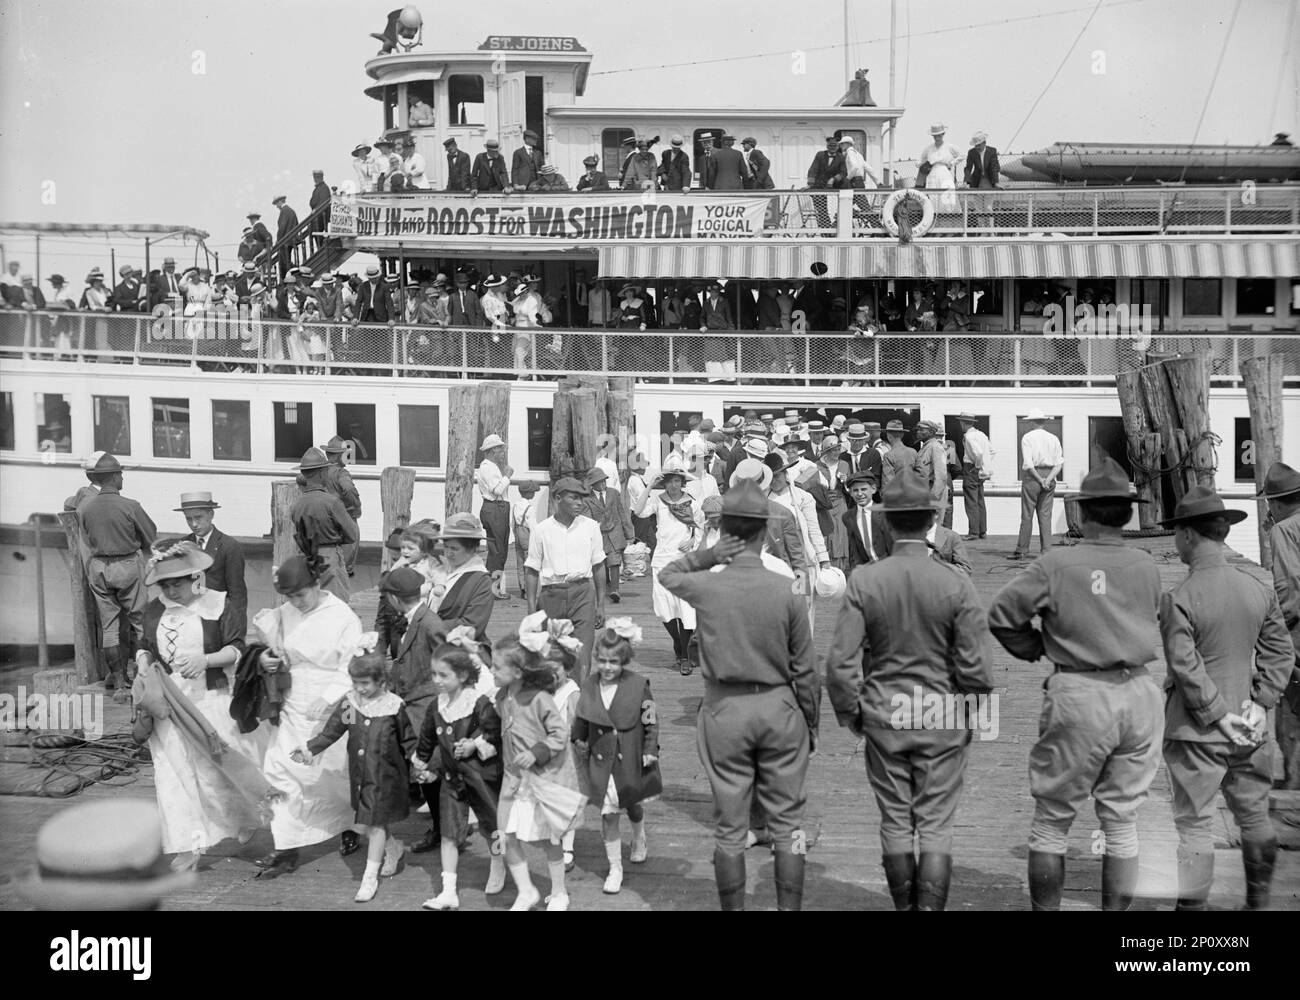 National Guard of Washingont D.C., Women And Children Leaving Boat On Return of M. And M. And N.G., 1916. Stock Photo